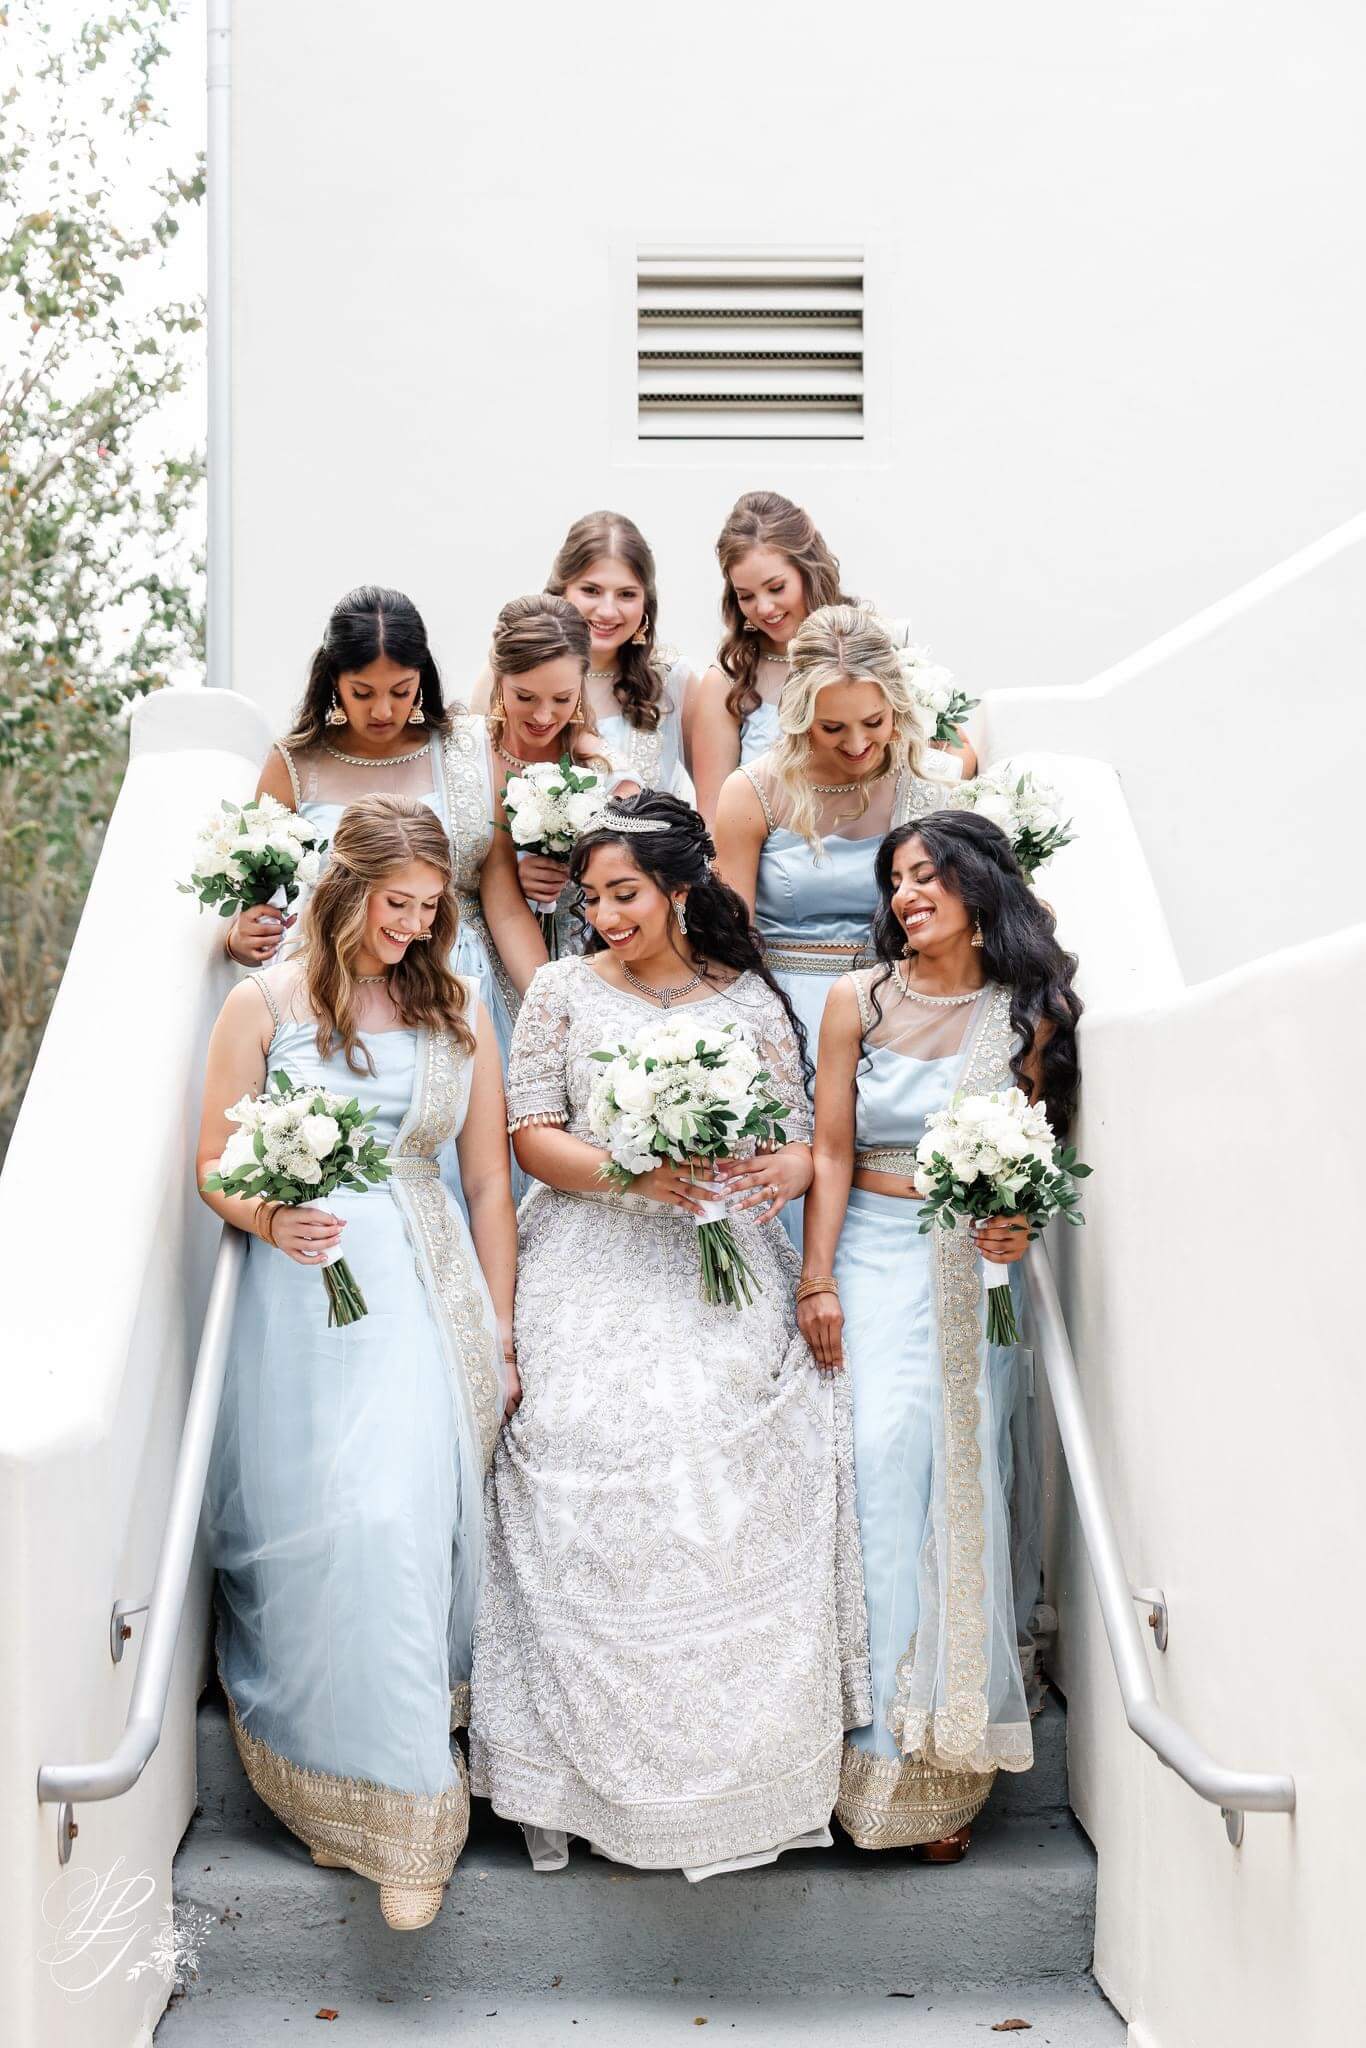 Bride and bridal party walking down the stairs of the venue with hair and makeup by Kristy's Artistry Design Team, all holding flowers, bride wearing a tiara.